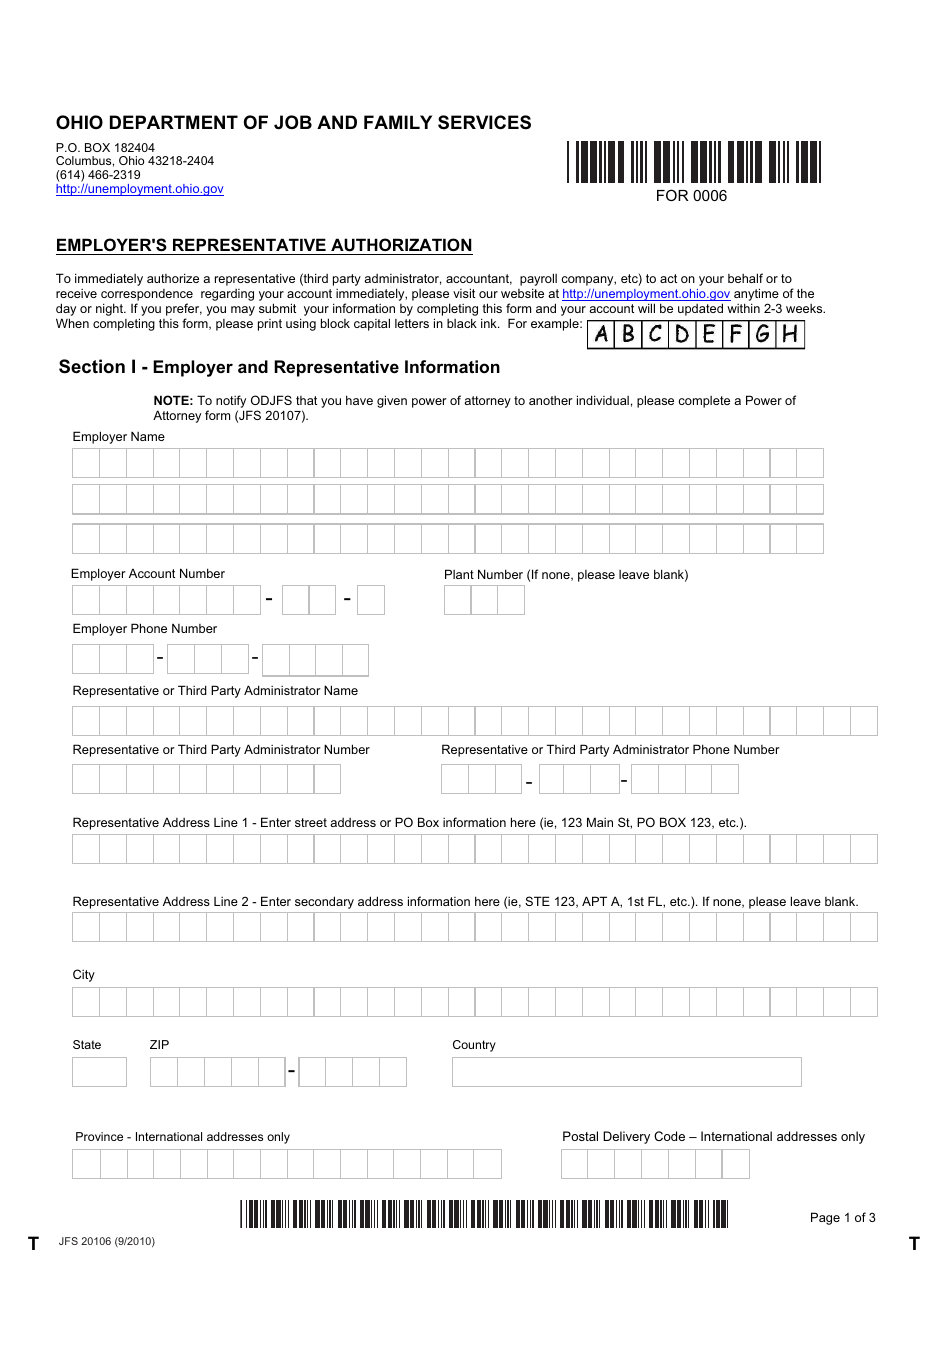 employment-verification-form-for-ohio-job-and-family-services-ployment